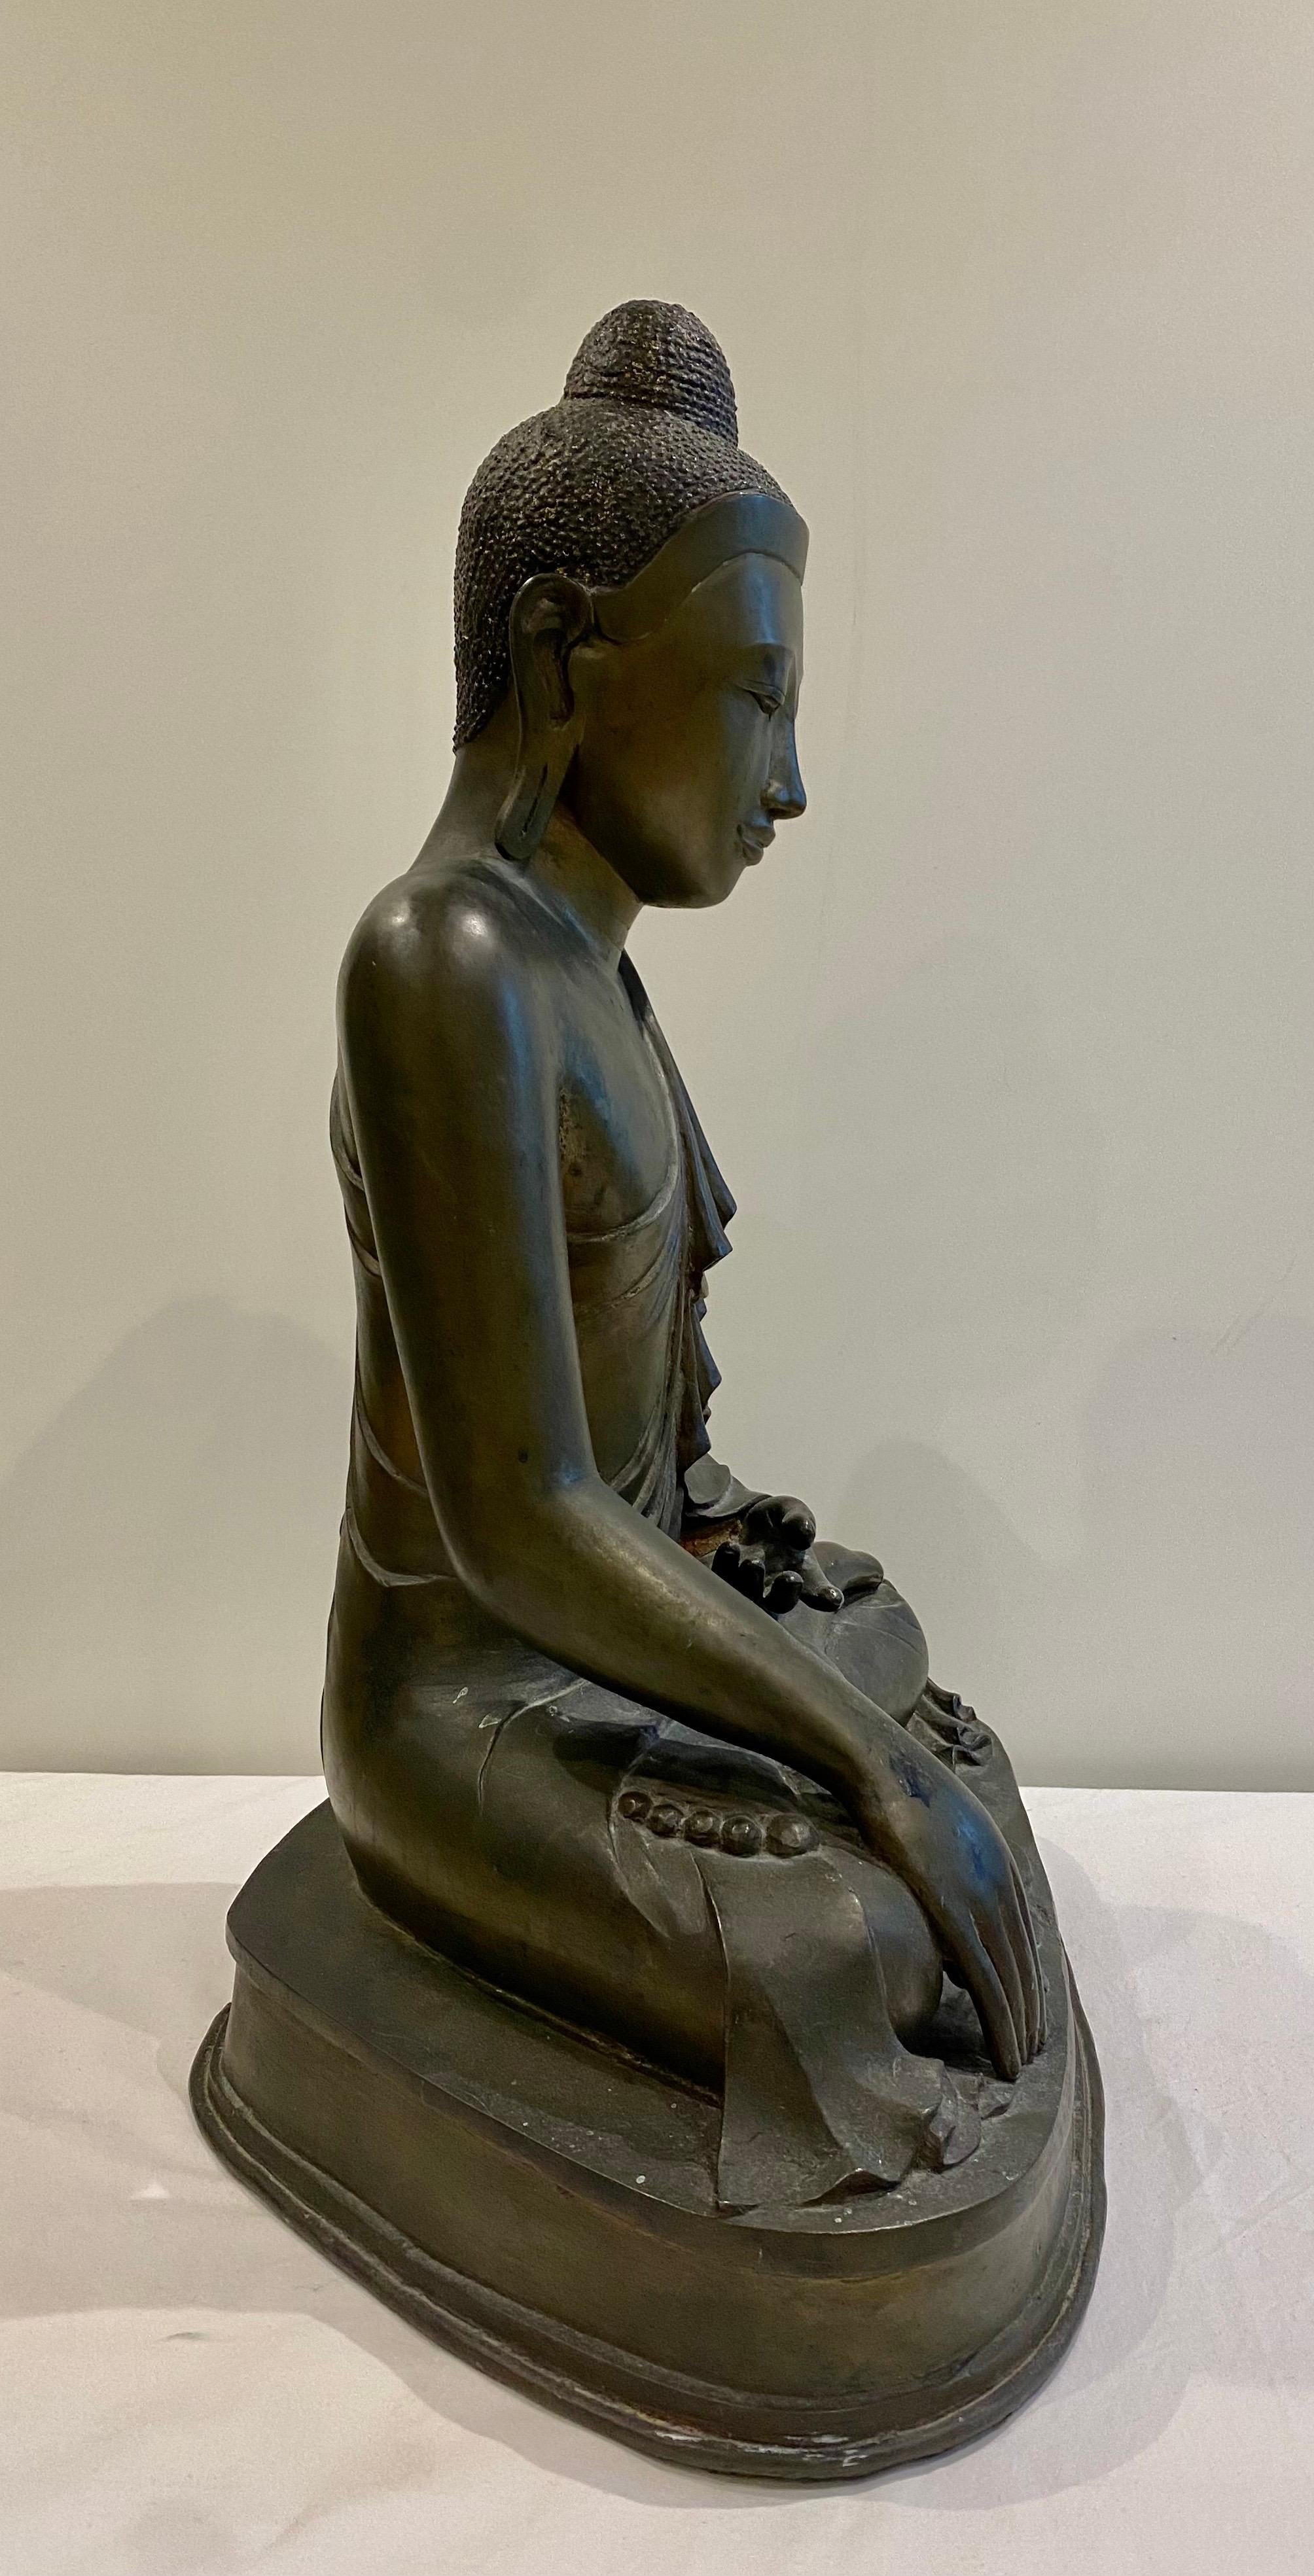 A Large size antique 19th century Mandalay period bronze seated Buddha,
The Buddha is seated with the right hand lowered bhumisparsimudra and the left hand rests in the lap.
This was manufactured in Burma around 1880's period.
The size is very